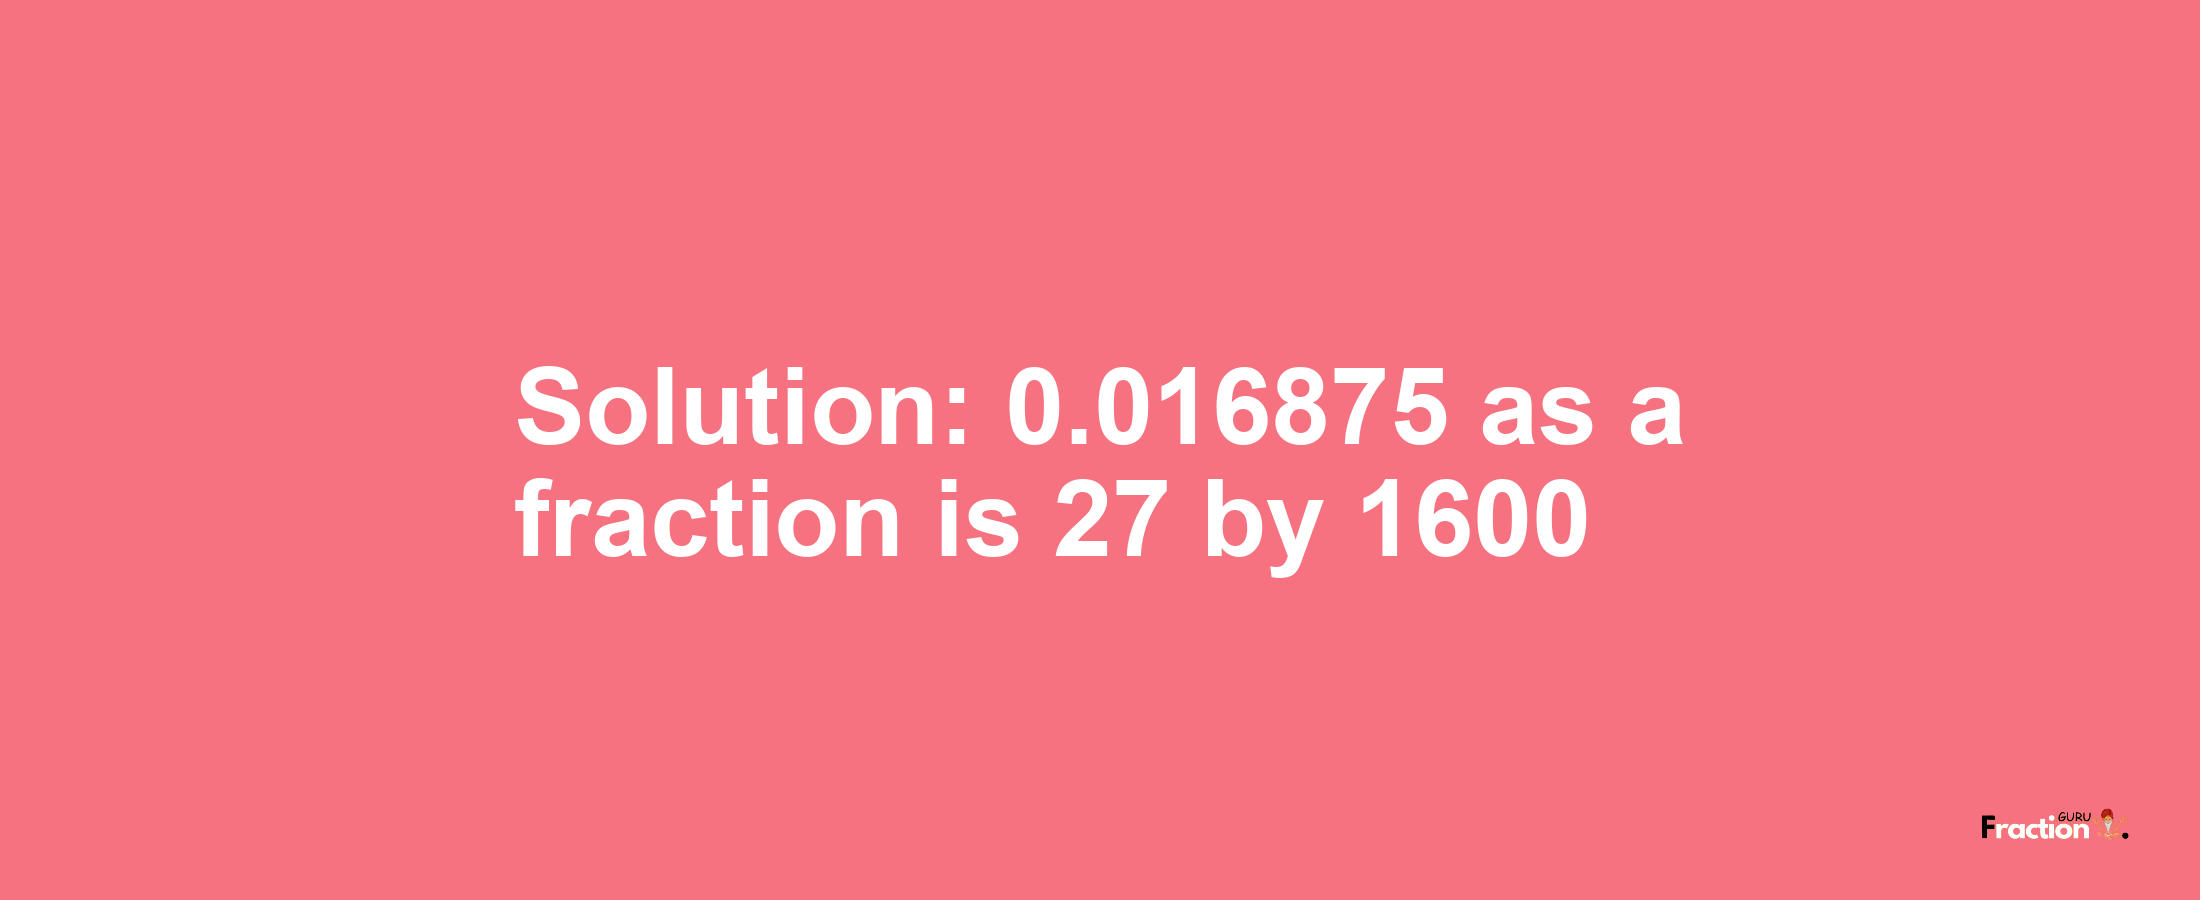 Solution:0.016875 as a fraction is 27/1600